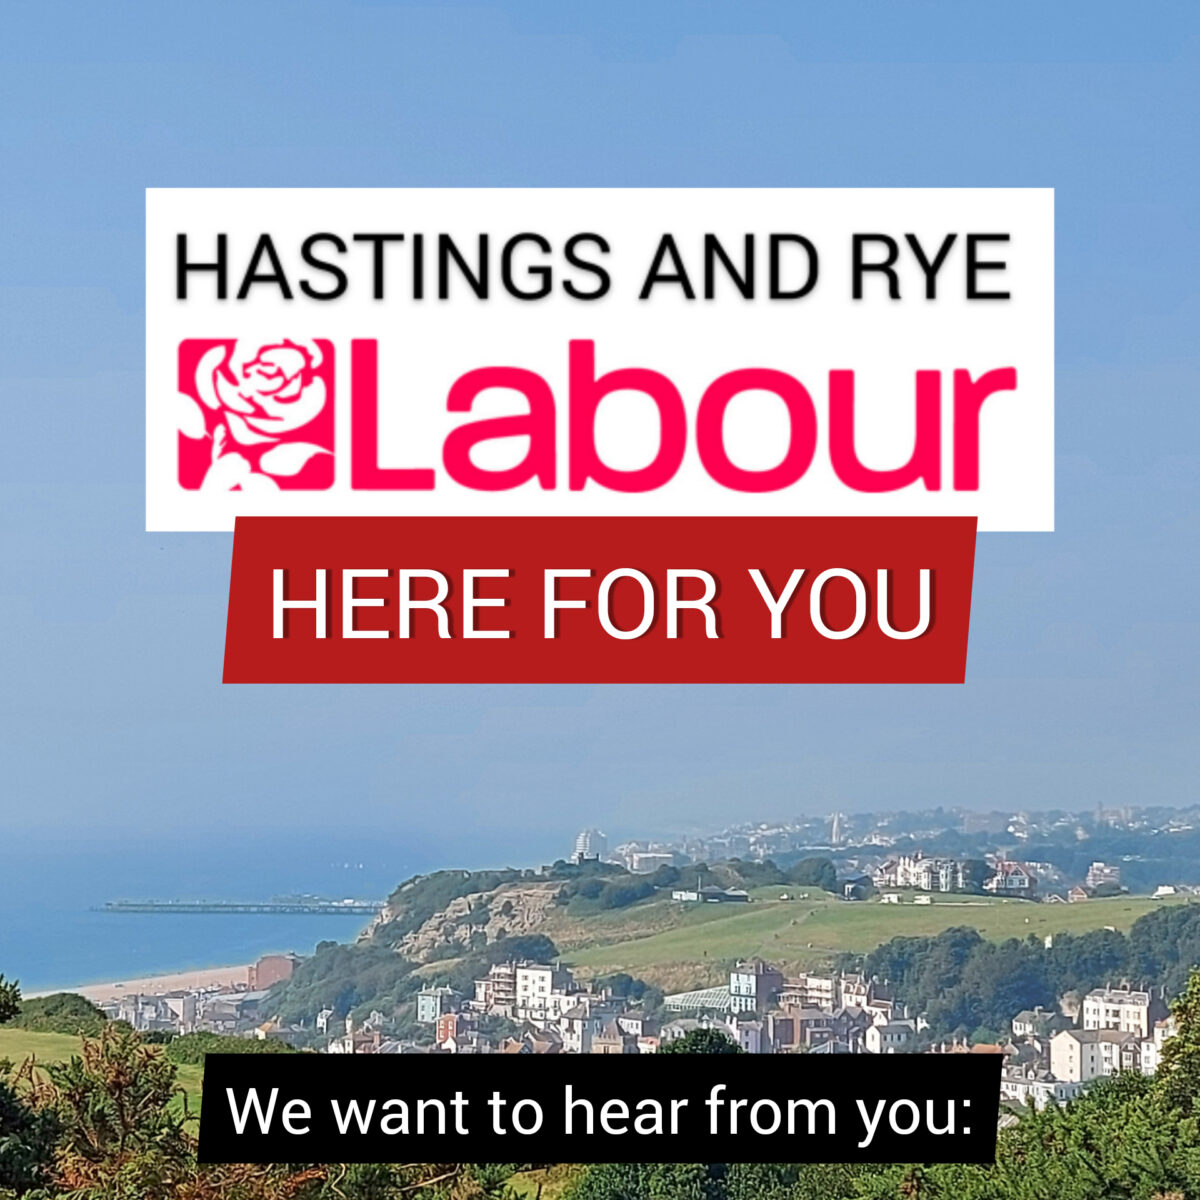 Photo says Hastings and Rye Labour - Here for You: we want to hear from you. There is a Get in Touch link button directly below the photo